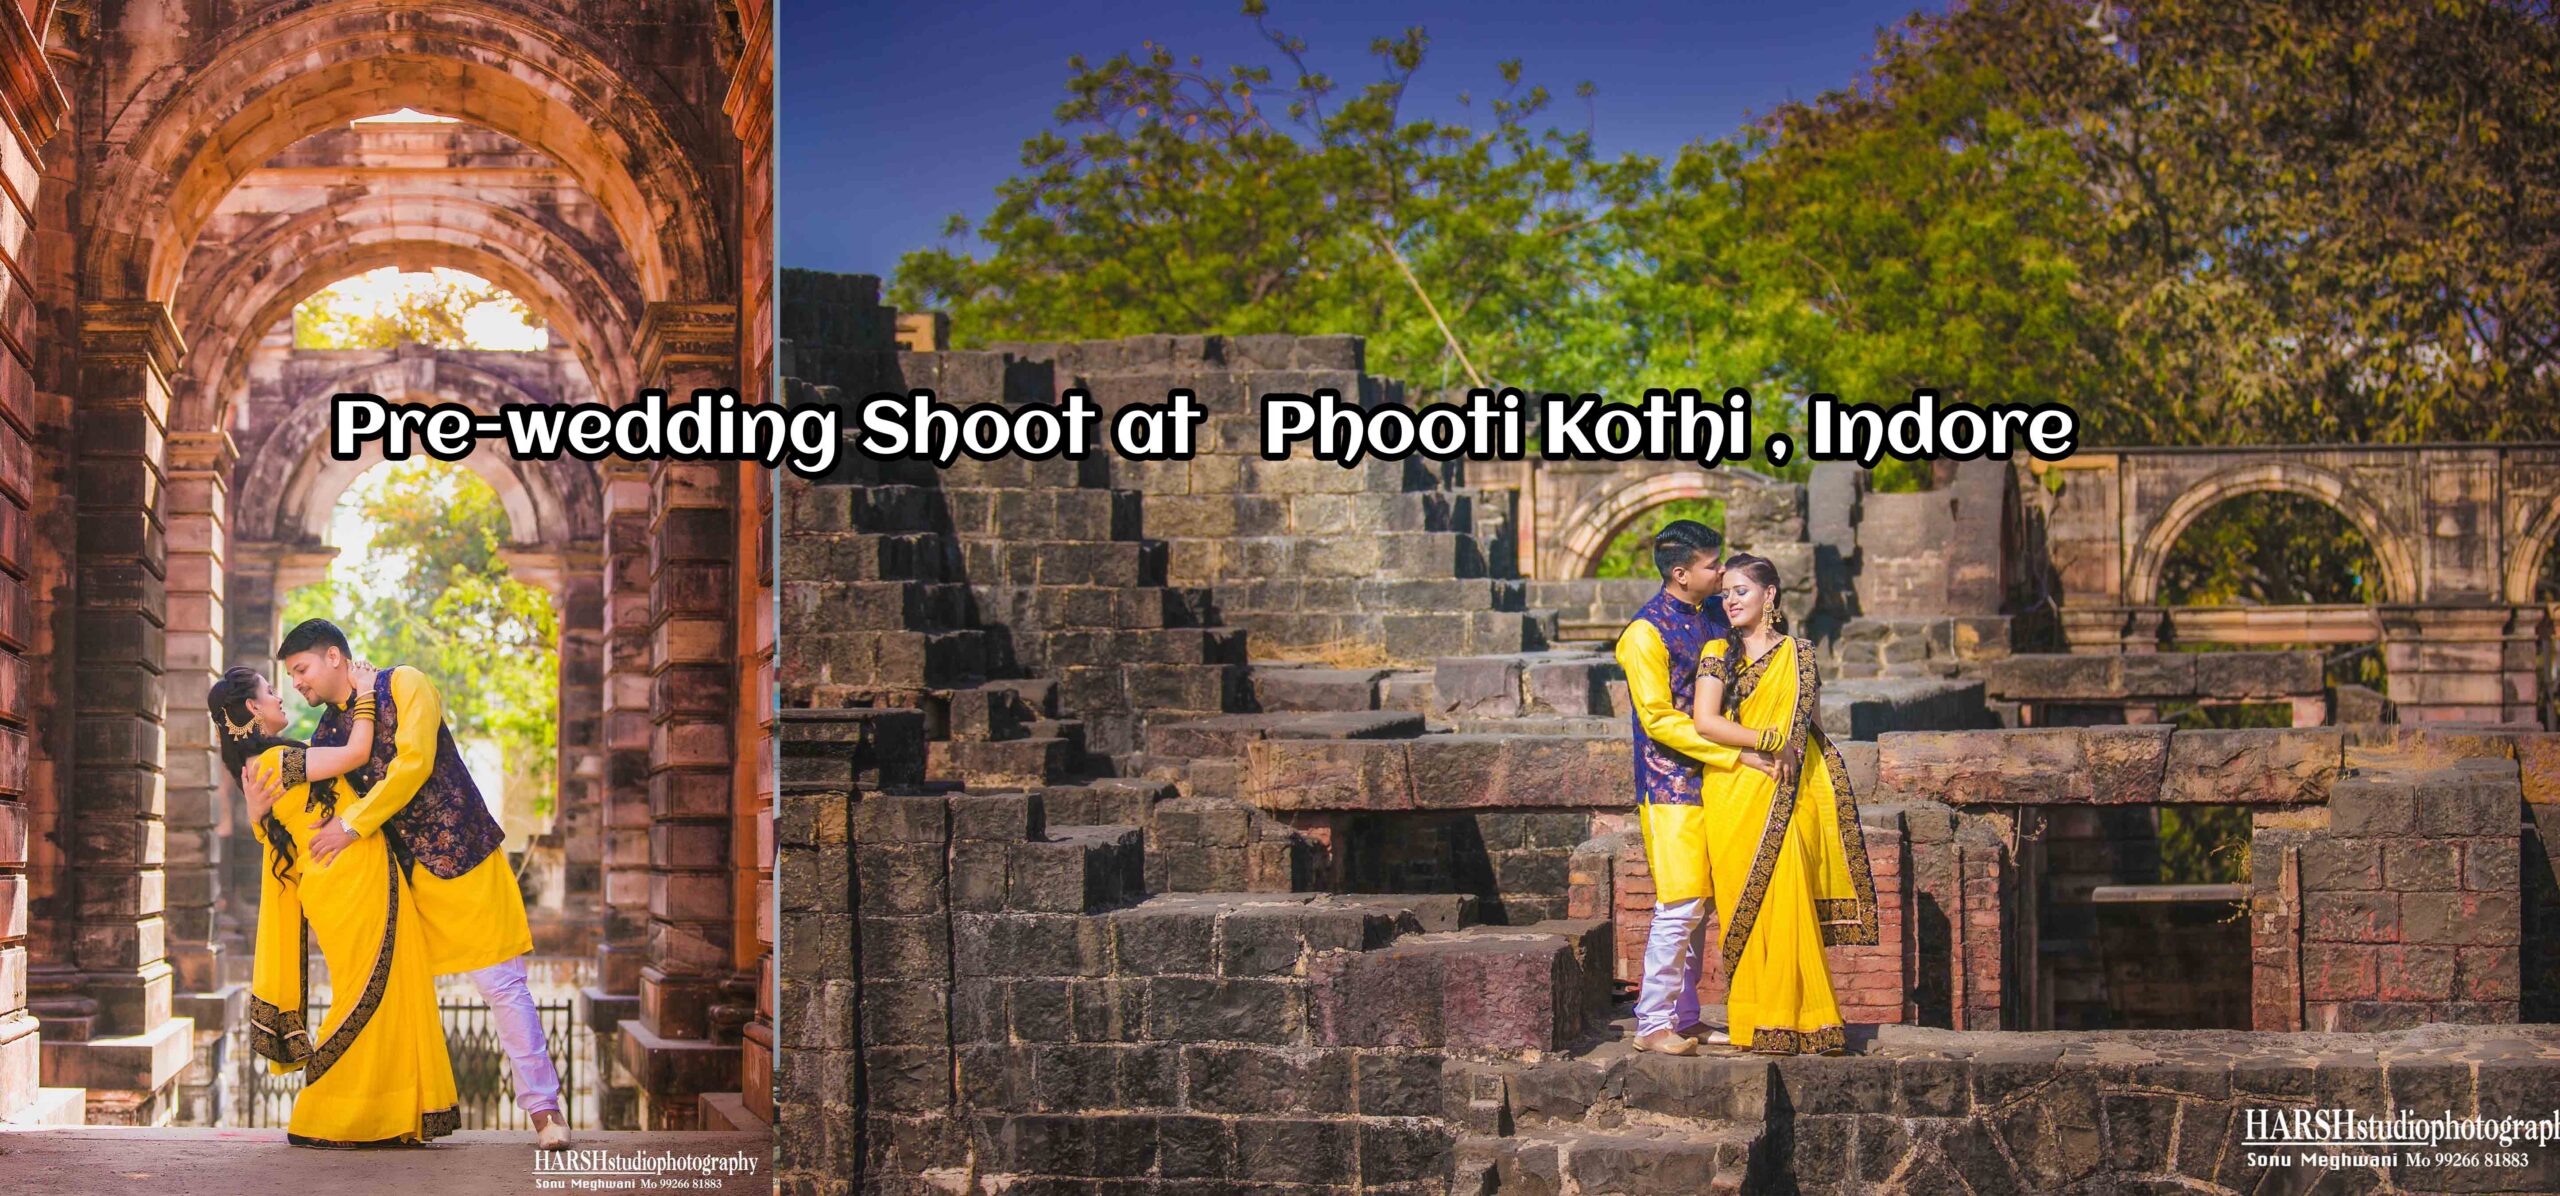 Pre-wedding shoot at Phooti Kothi, Indore, India, featuring a couple against the historic architectural backdrop, captured by Harsh Studio Photography.